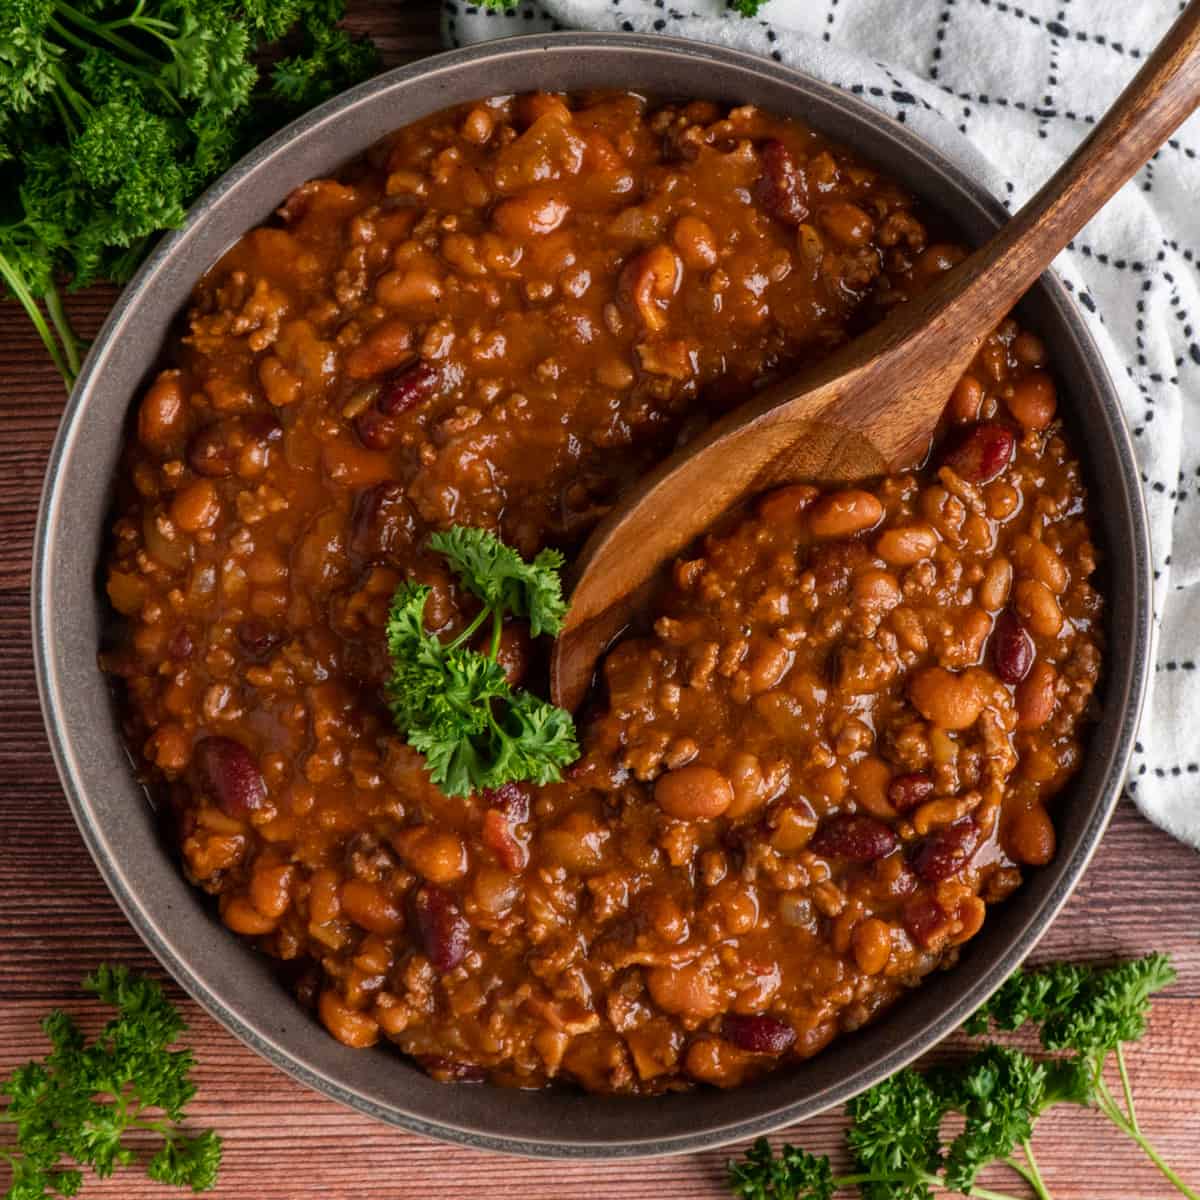 Cowboy beans in a gray bowl